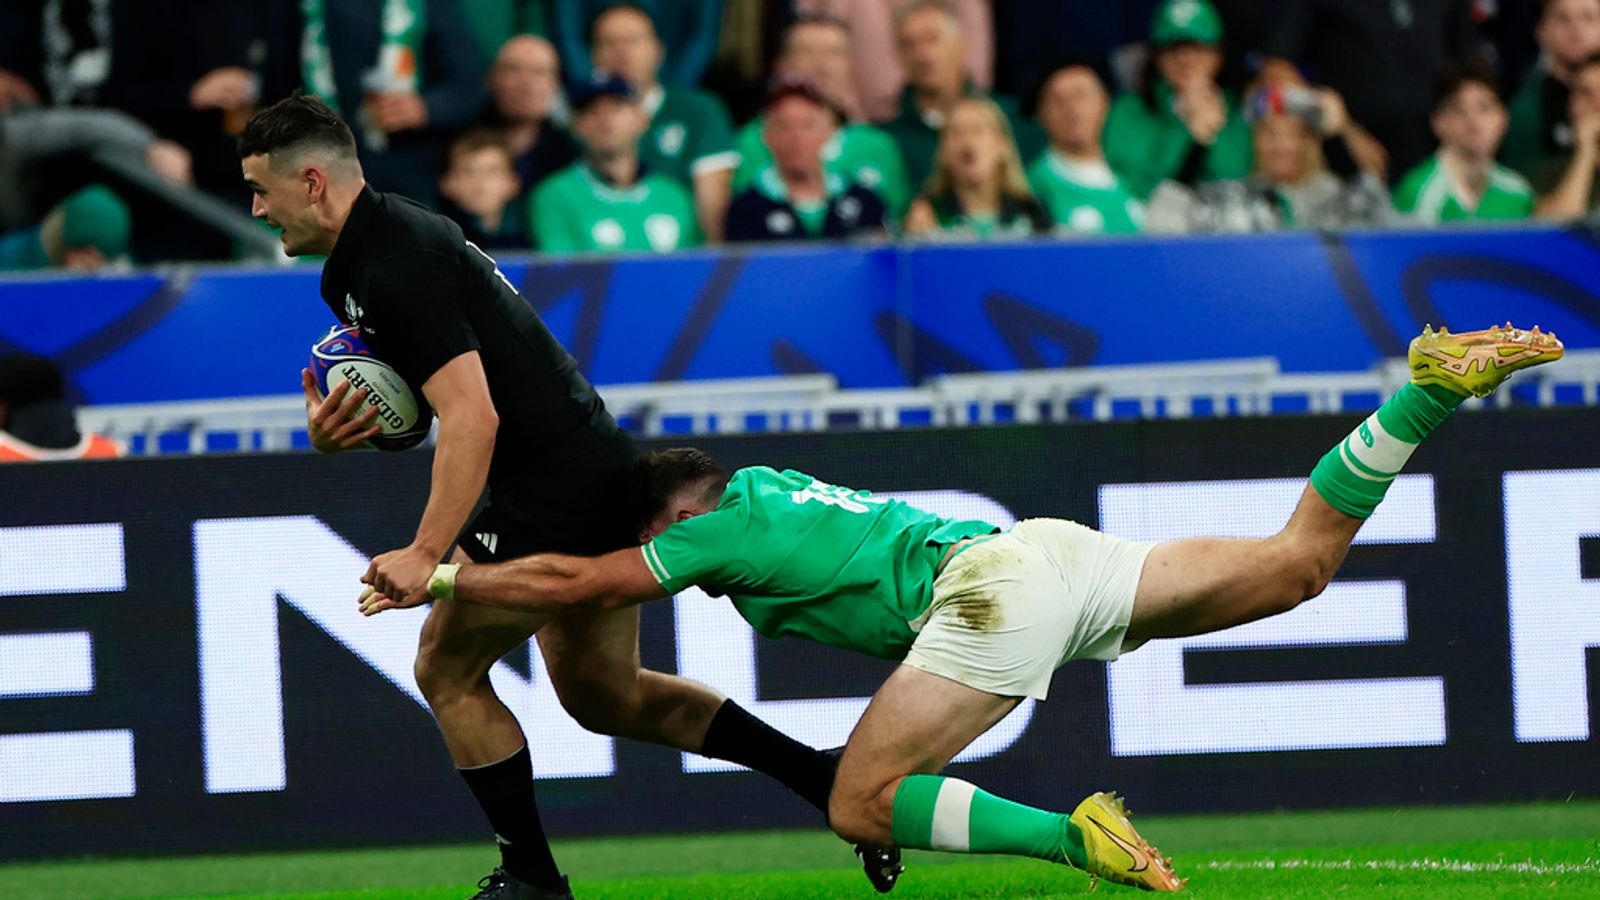 New Zealand's Will Jordan, left, scores a try as Ireland's Hugo Keenan tries to stop during the Rugby World Cup quarterfinal match between Ireland and New Zealand at the Stade de France in Saint-Denis, near Paris, Saturday, Oct. 14, 2023. (AP Photo/Aurelien Morissard)